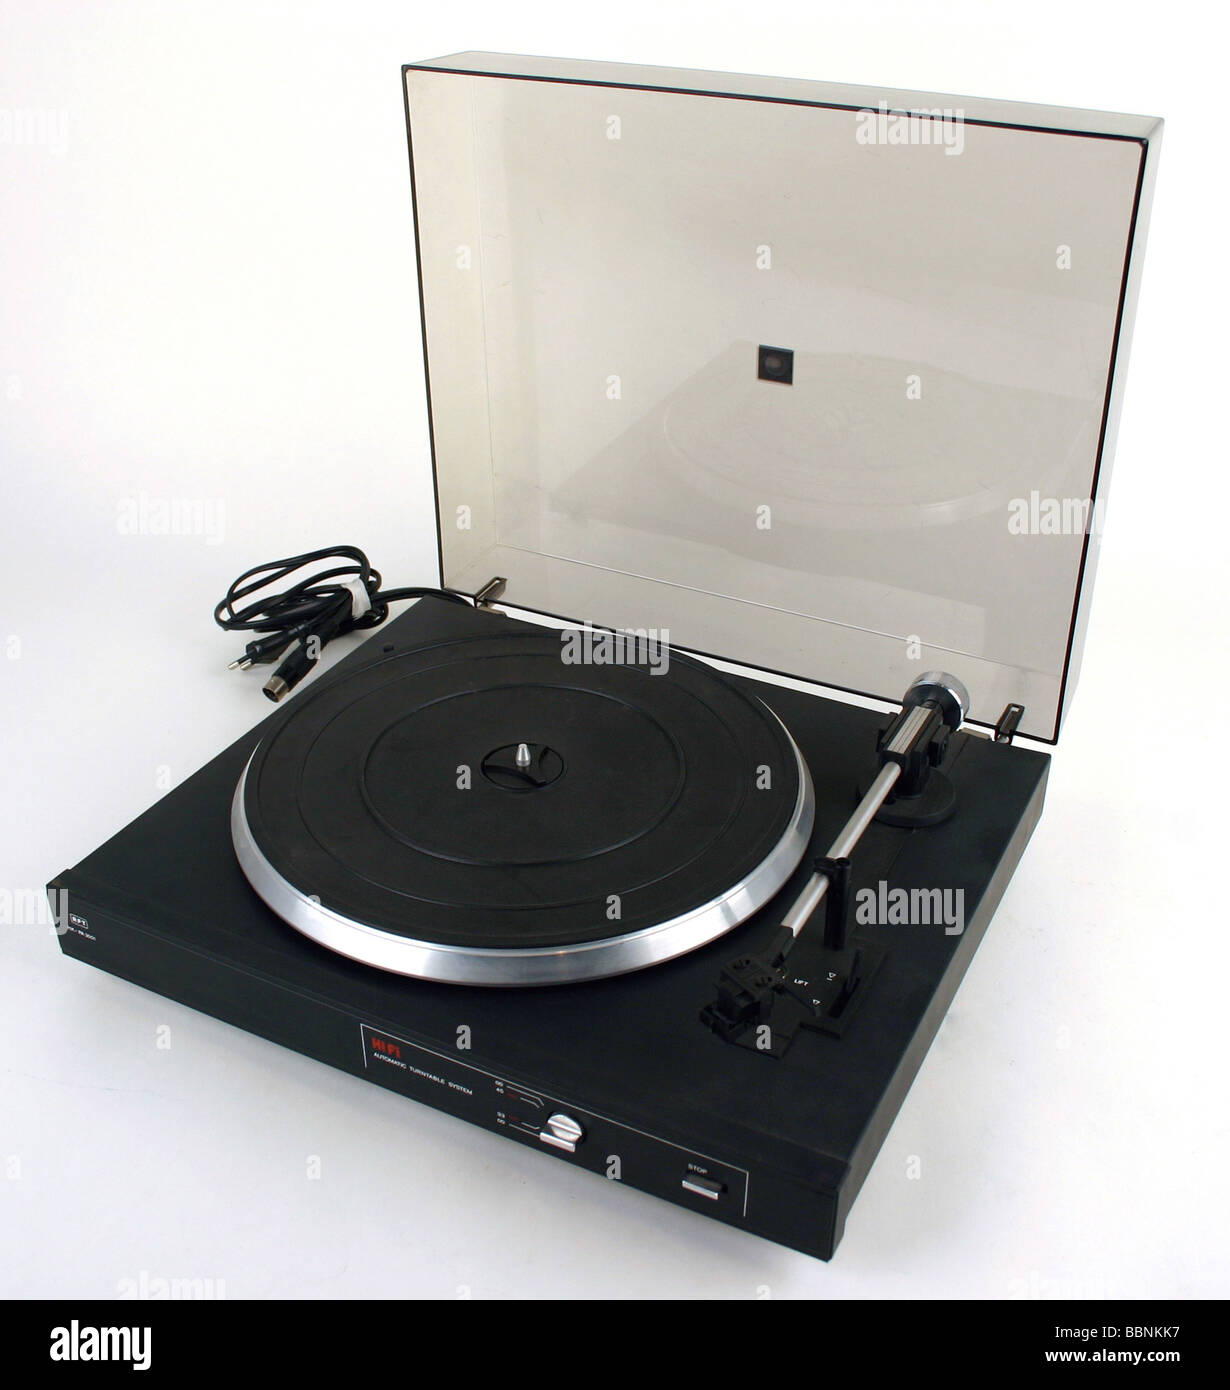 technics, full automatic stereo record player SP 3001, made by VEB Phonotechnik Zittau-Pirna, GDR, 1983, historic, historical, 20th century, East-Germany, East Germany, DDR, sound, audio technic, home electronics, factory design, 1980s, 80s, Zittau, Pirna, clipping, Stock Photo